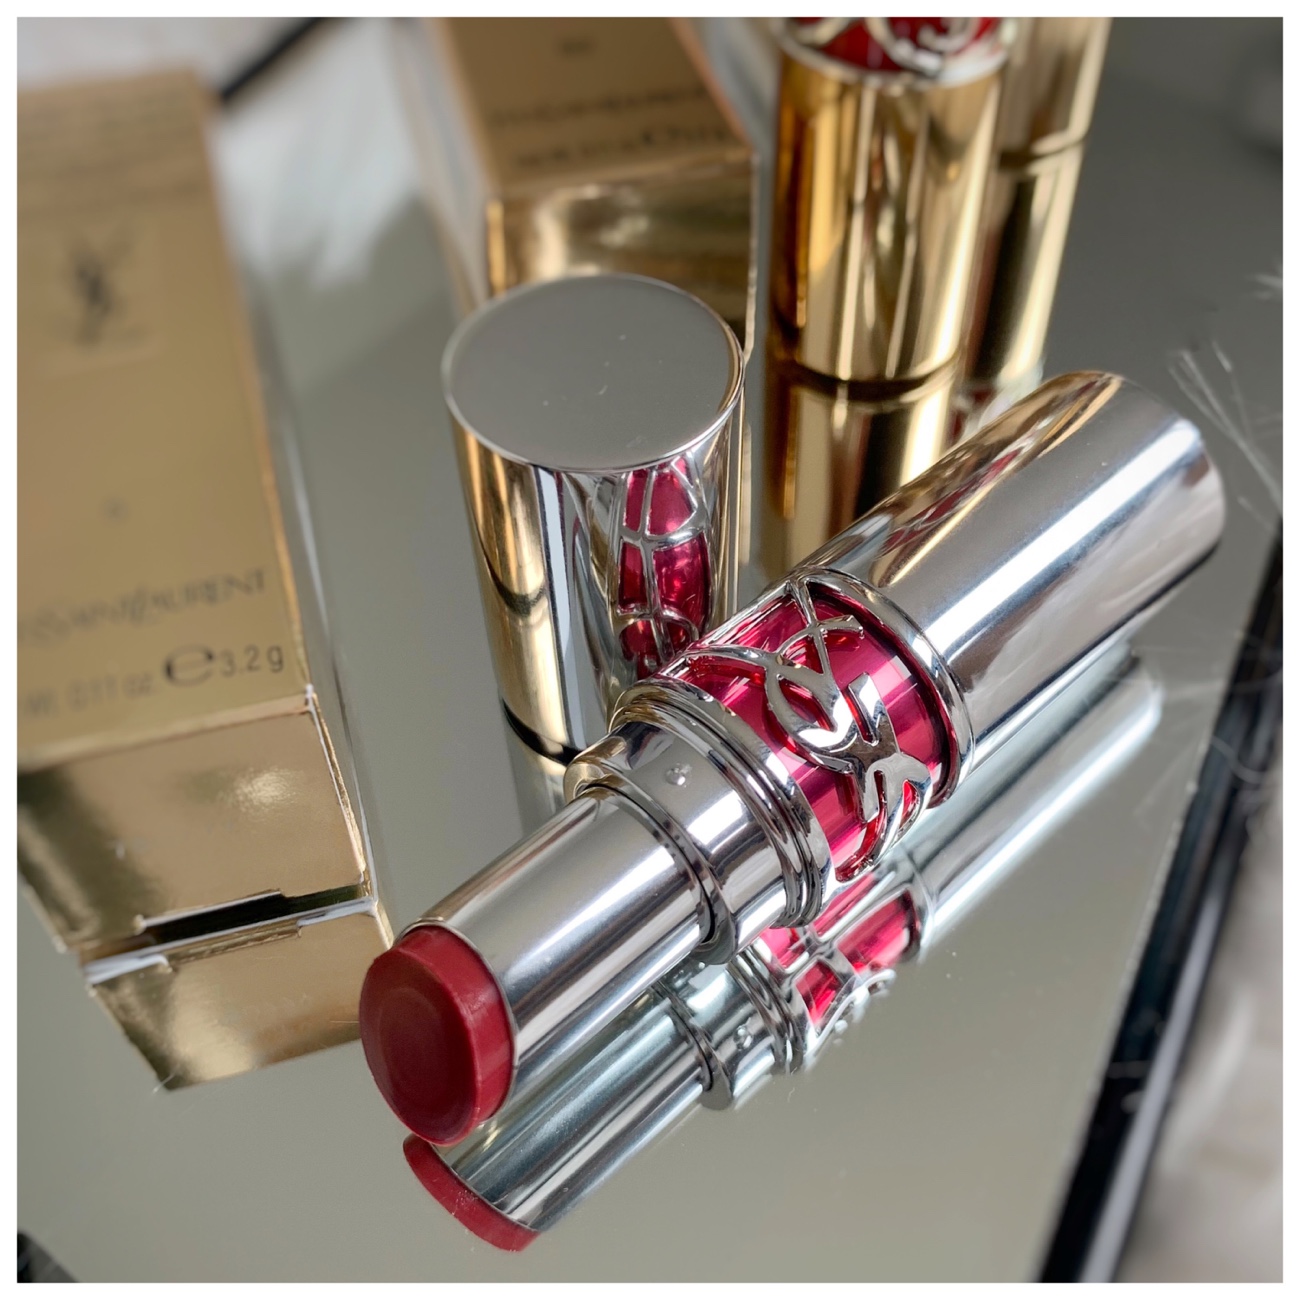 YSL Candy Glaze Lipgloss Stick Try-On + First Impressions